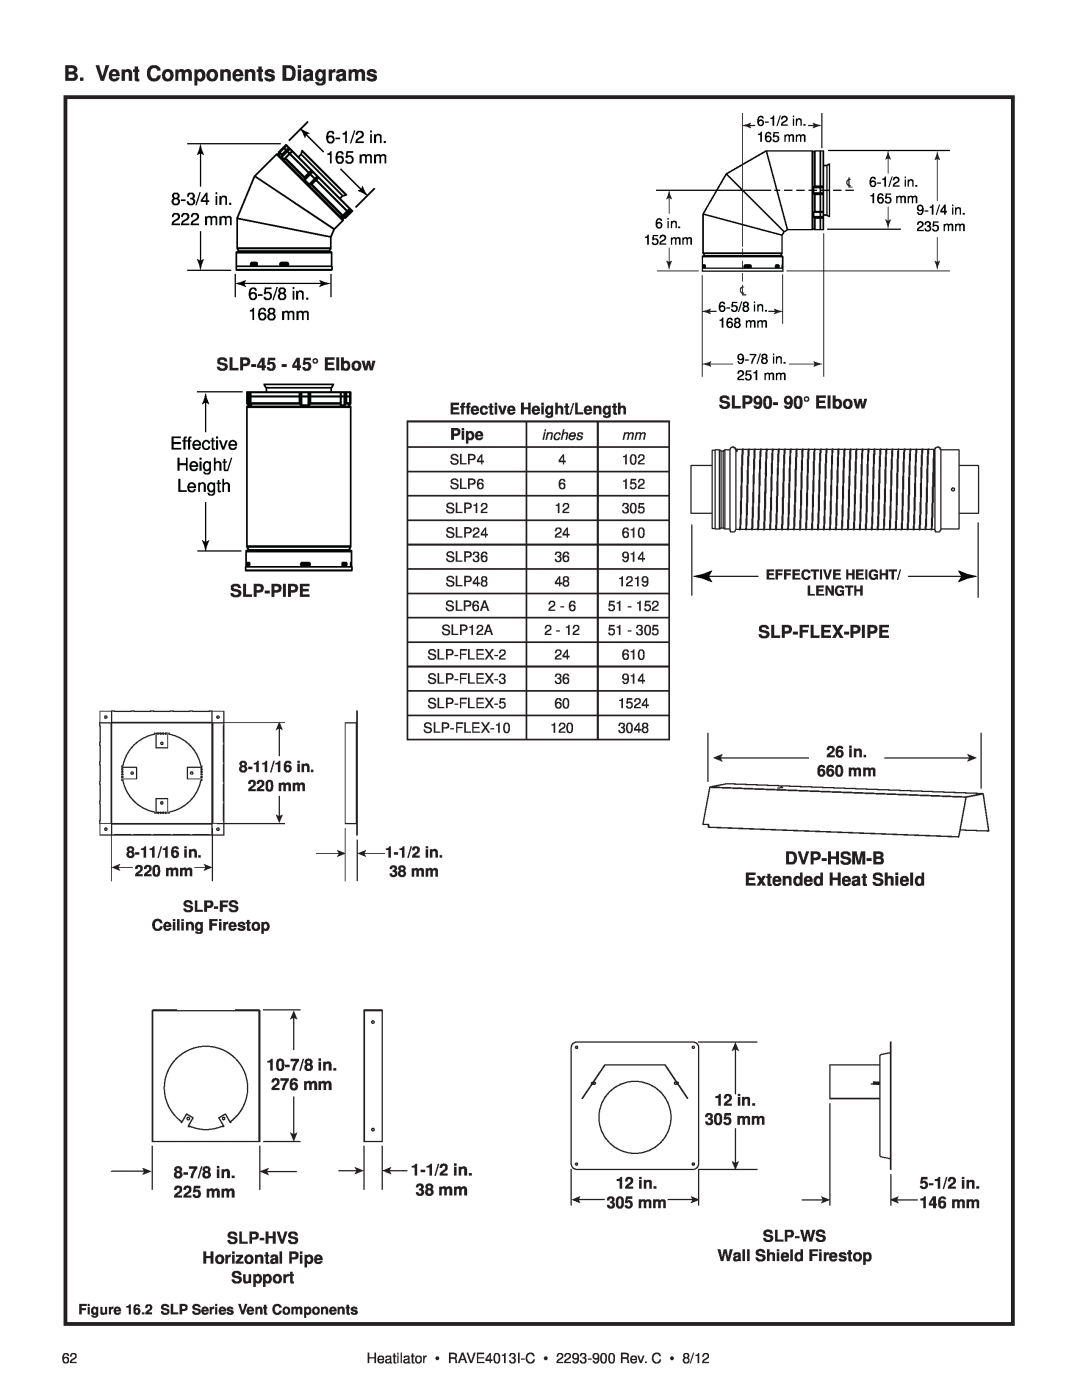 Heatiator Rave4013i-c B. Vent Components Diagrams, 6-1/2in, 165 mm, 8-3/4in, 222 mm, 6-5/8in, 168 mm, SLP-45- 45 Elbow 